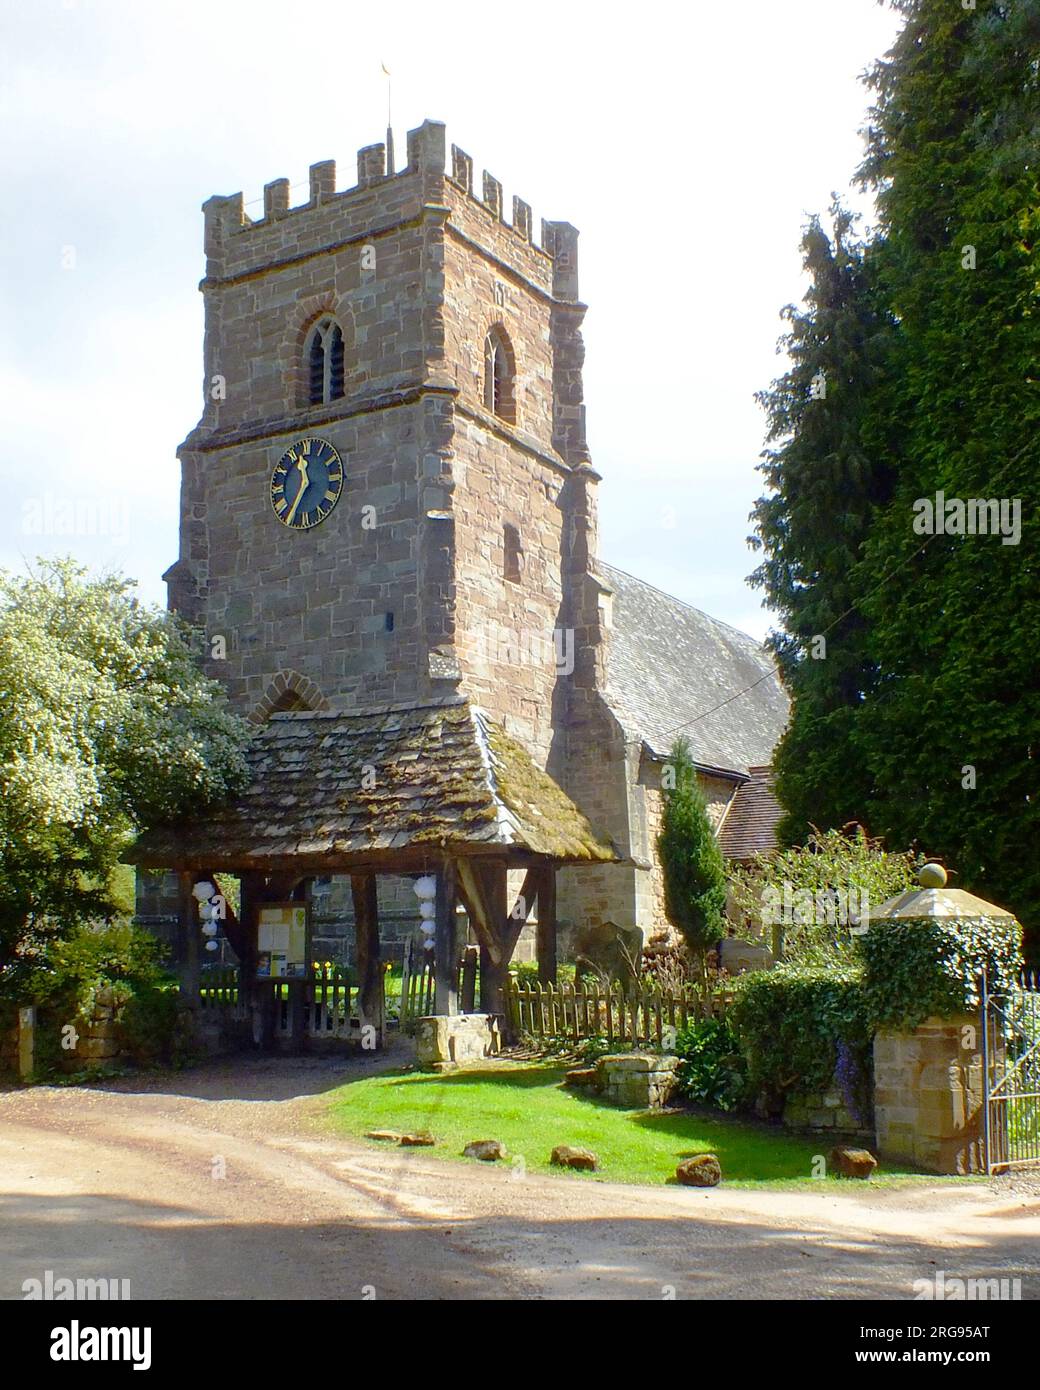 St John the Baptist Church, a Grade II listed building in the village of Whitbourne, near Bromyard, Herefordshire. Stock Photo